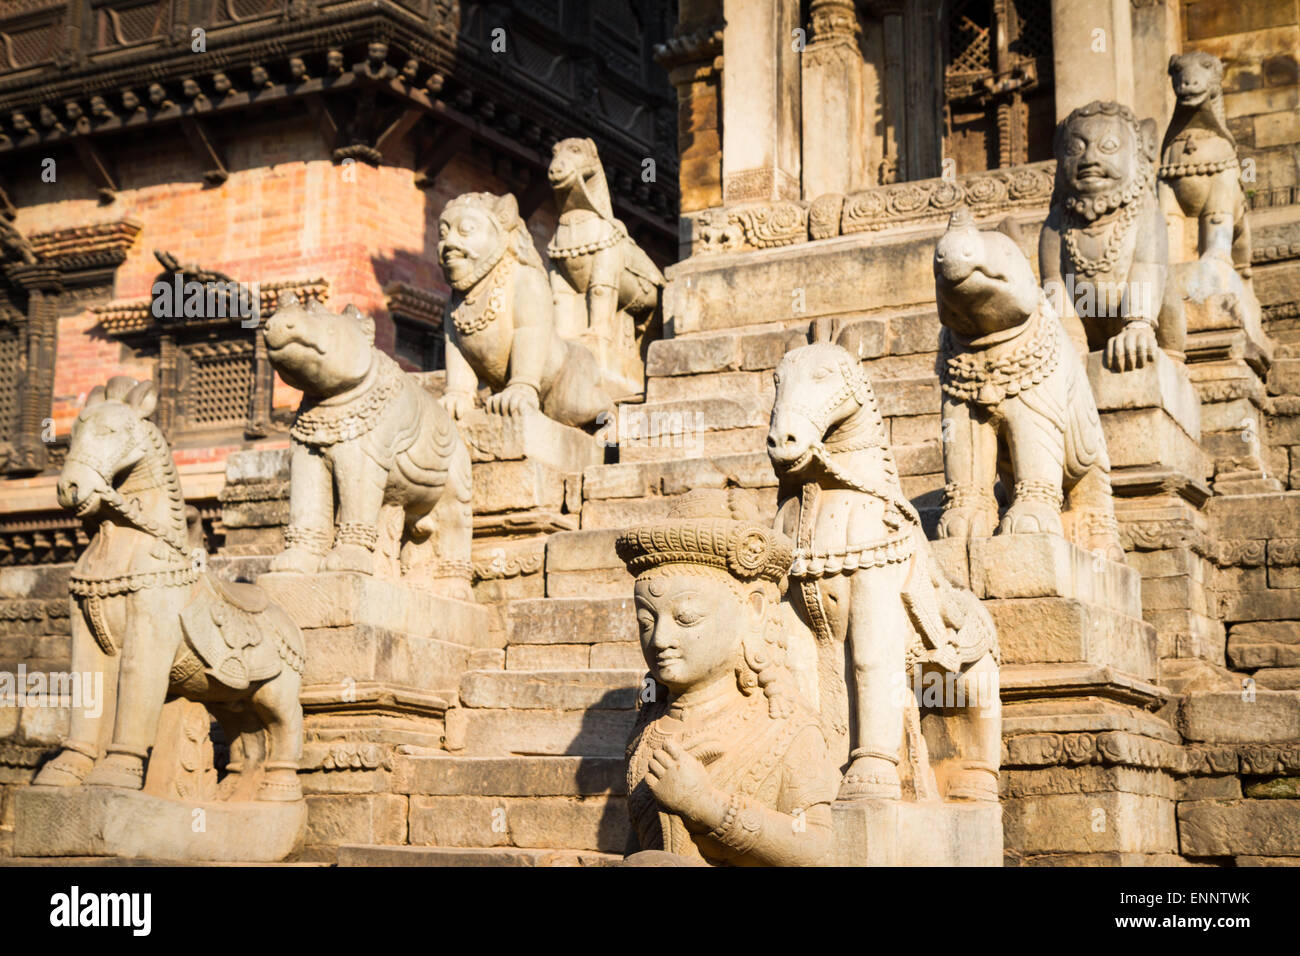 Statues lining steps of historic Hindu temple in Bhaktapur, Nepal Stock Photo